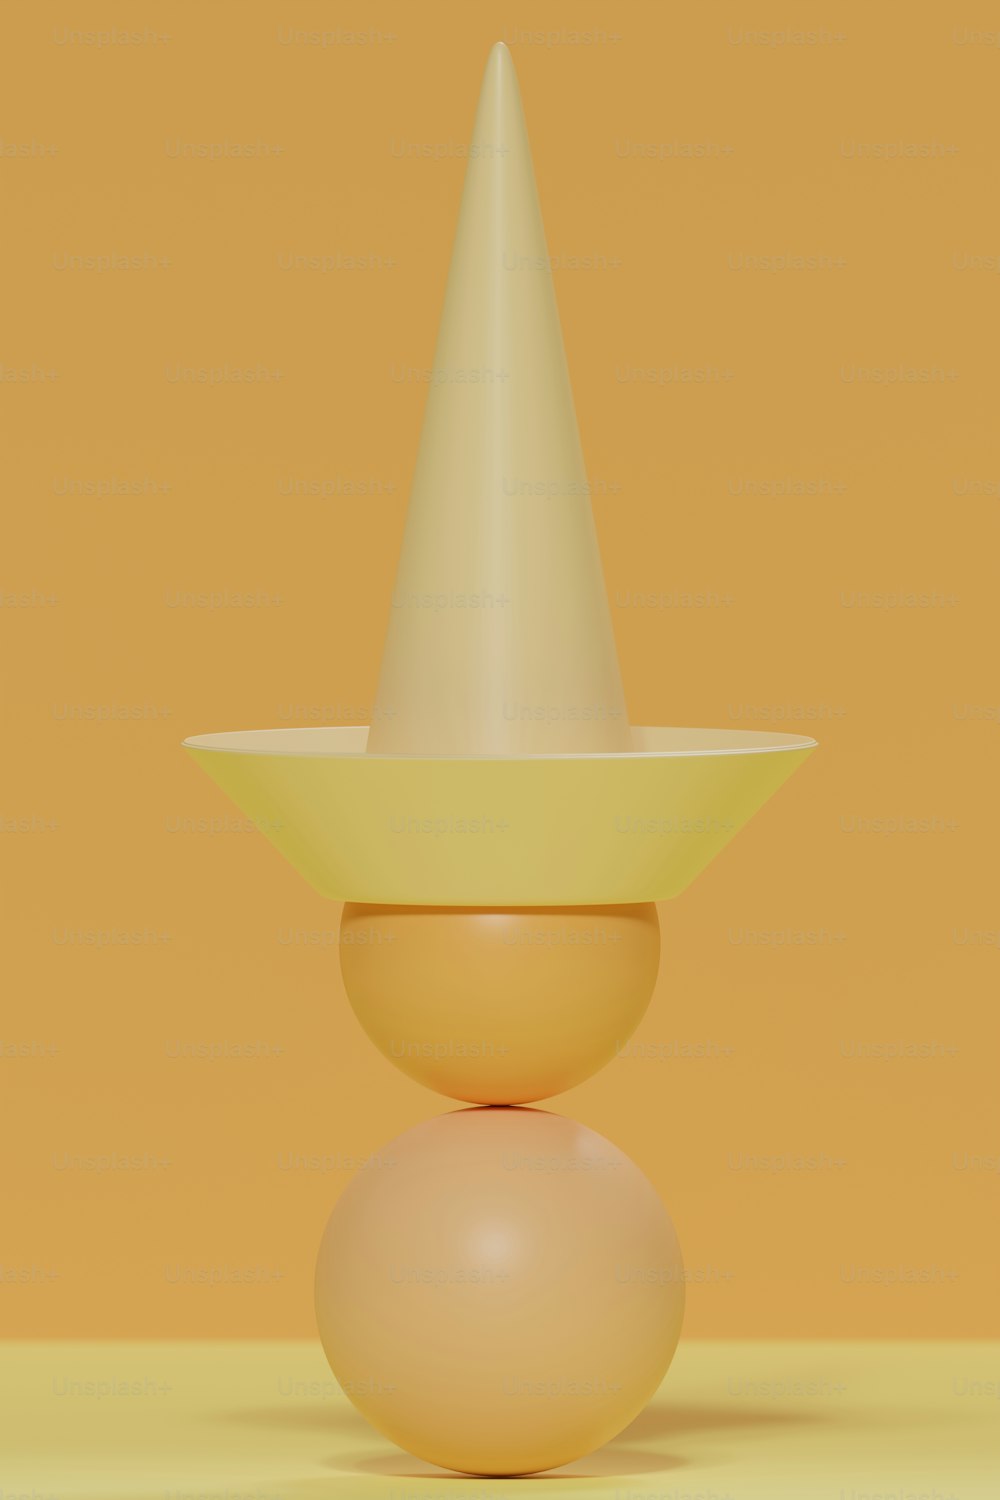 a yellow object with a white cone on top of it